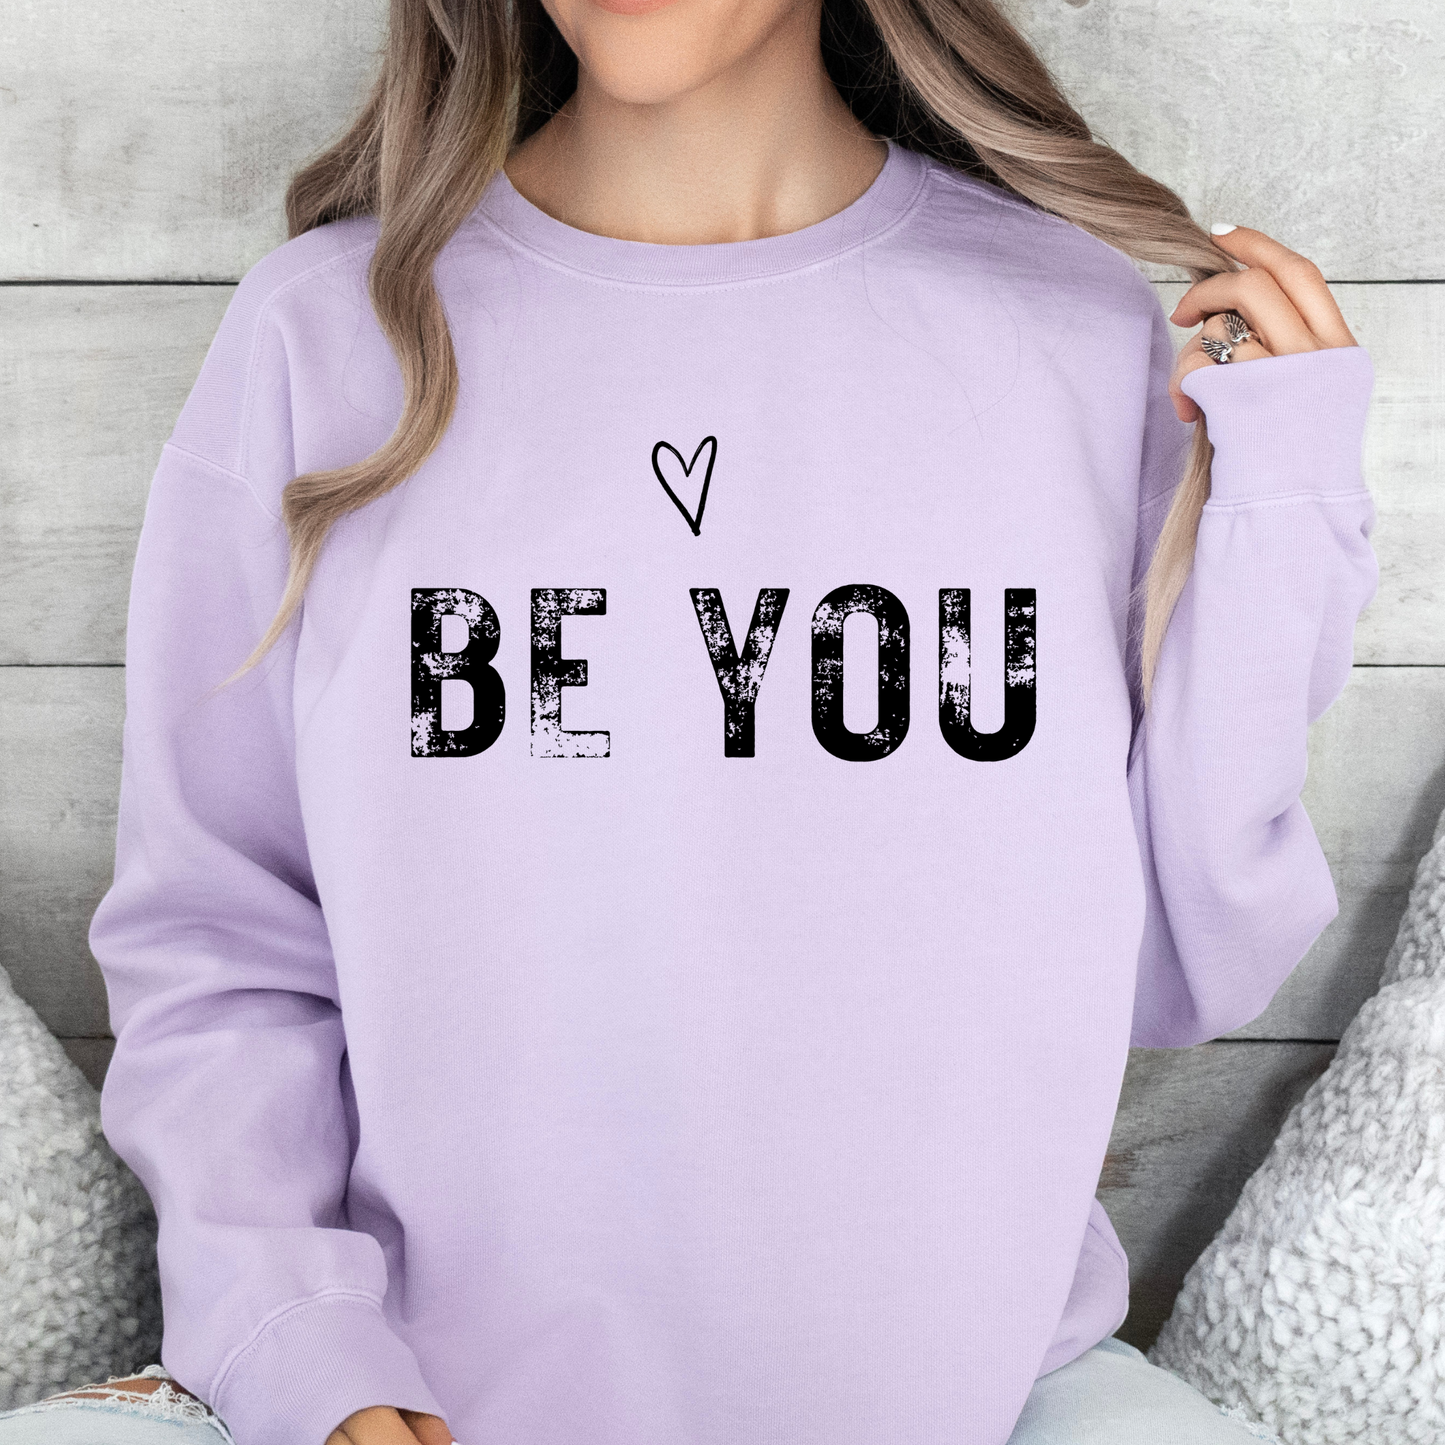 Be You Comfort Colors Sweatshirt - Express Yourself in Style